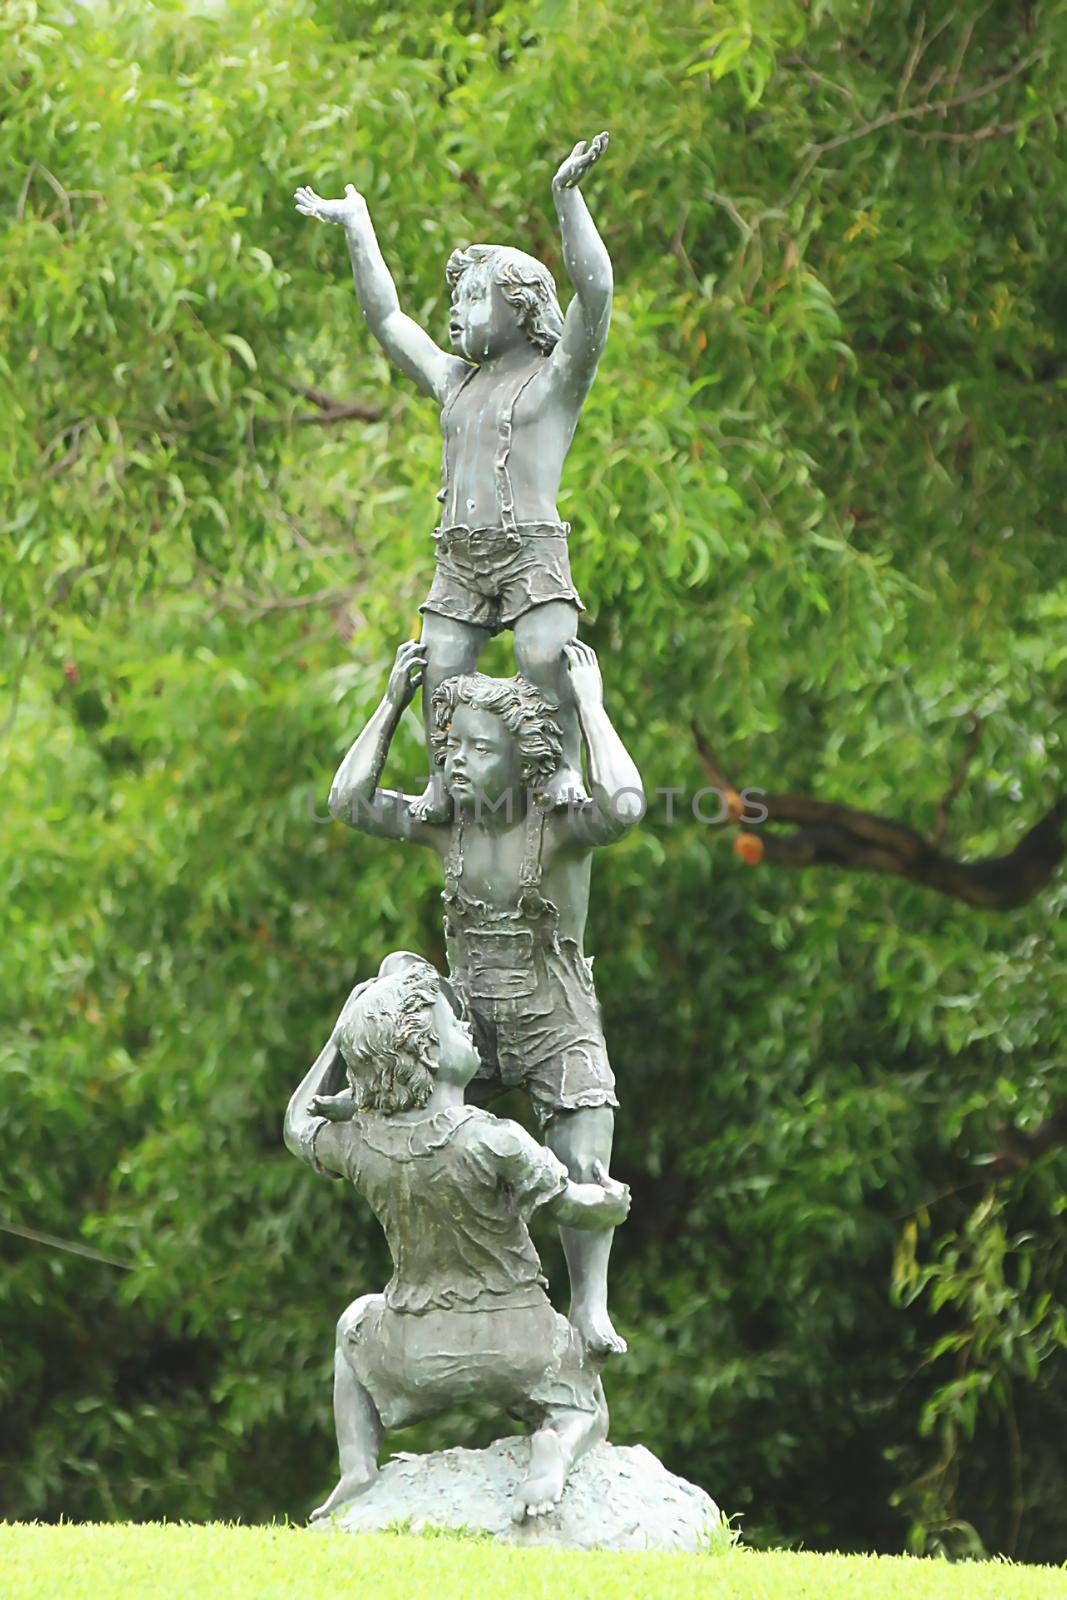 A statue of a child doing acrobatics is located in the park.